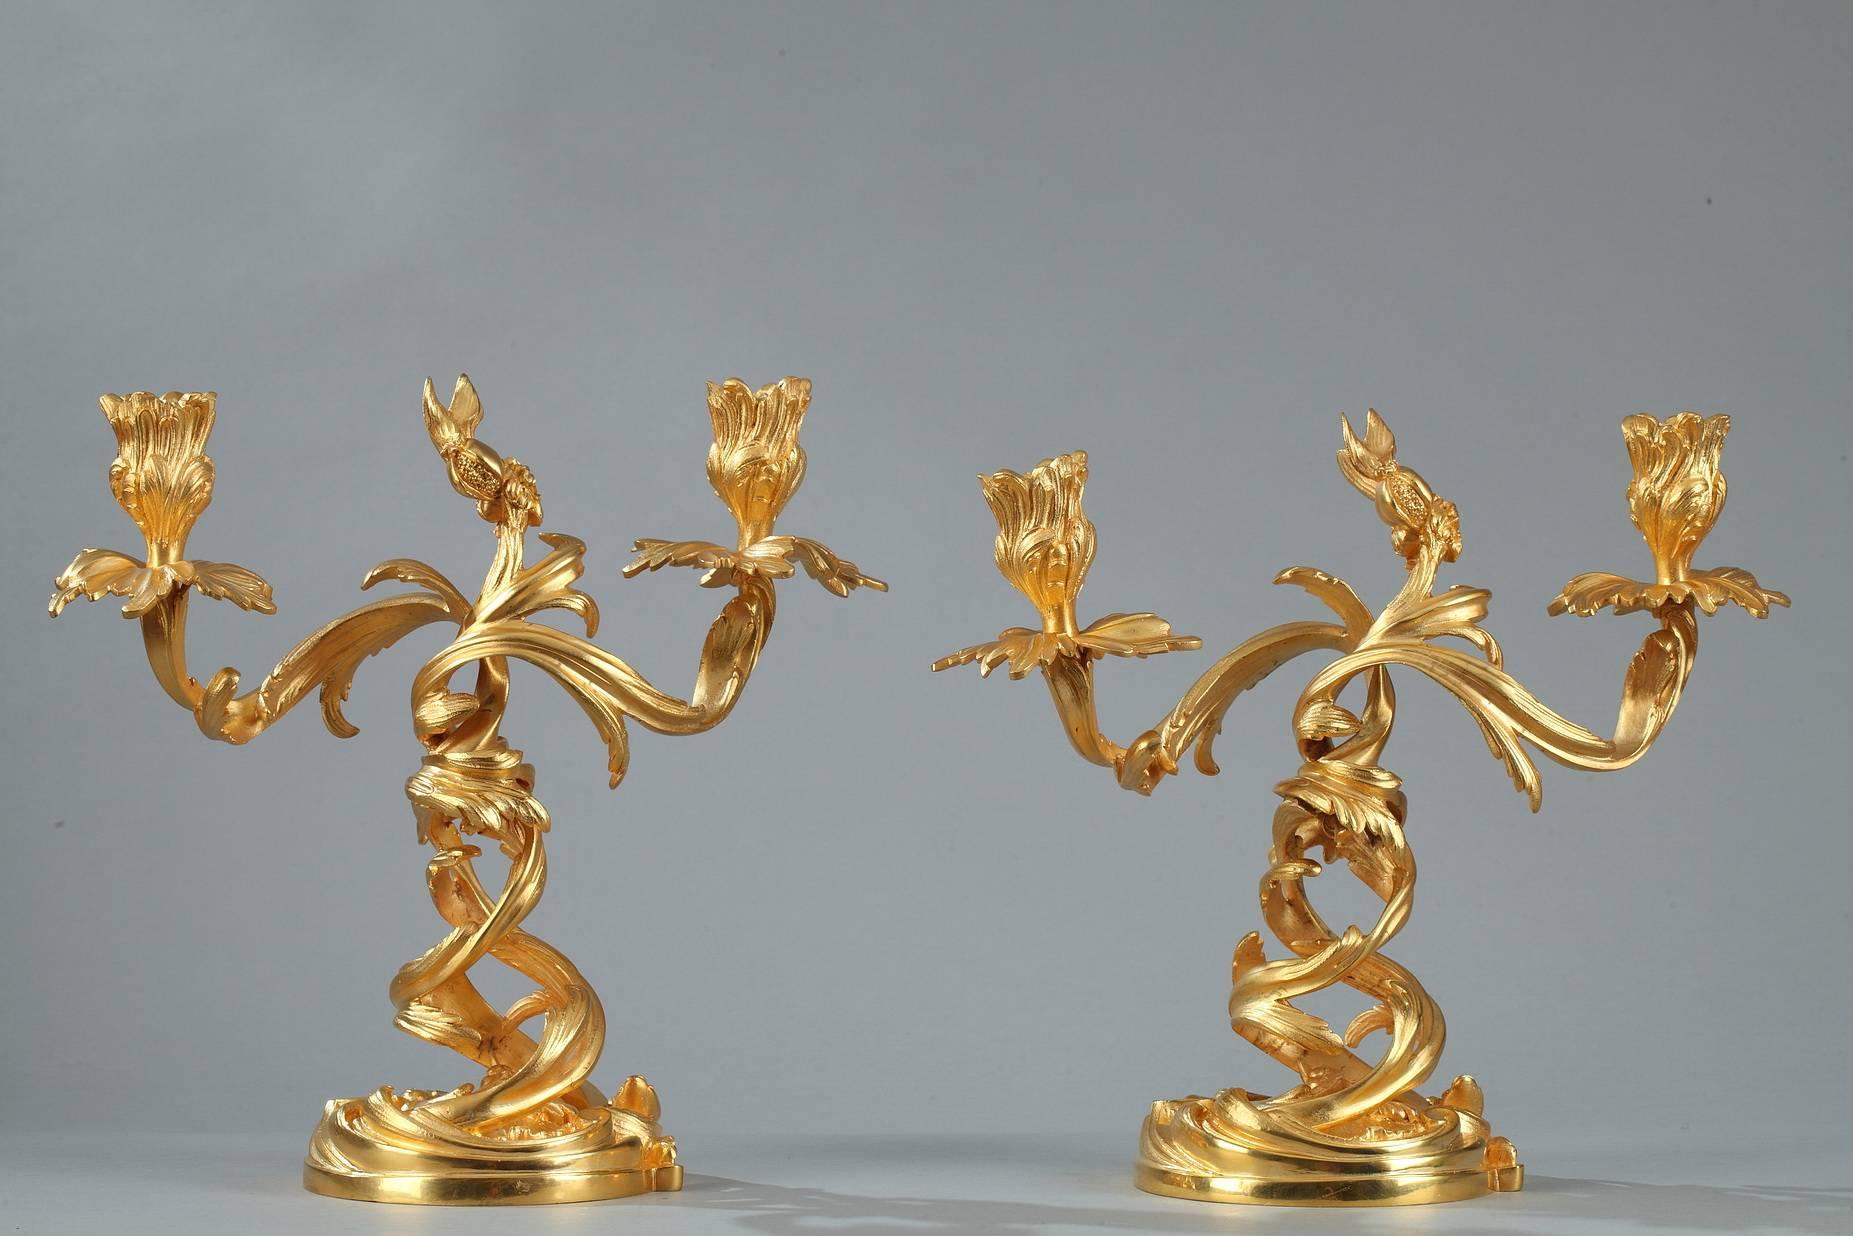 19th Century Pair of Ormolu Candelabras in Louis XV Style For Sale 1